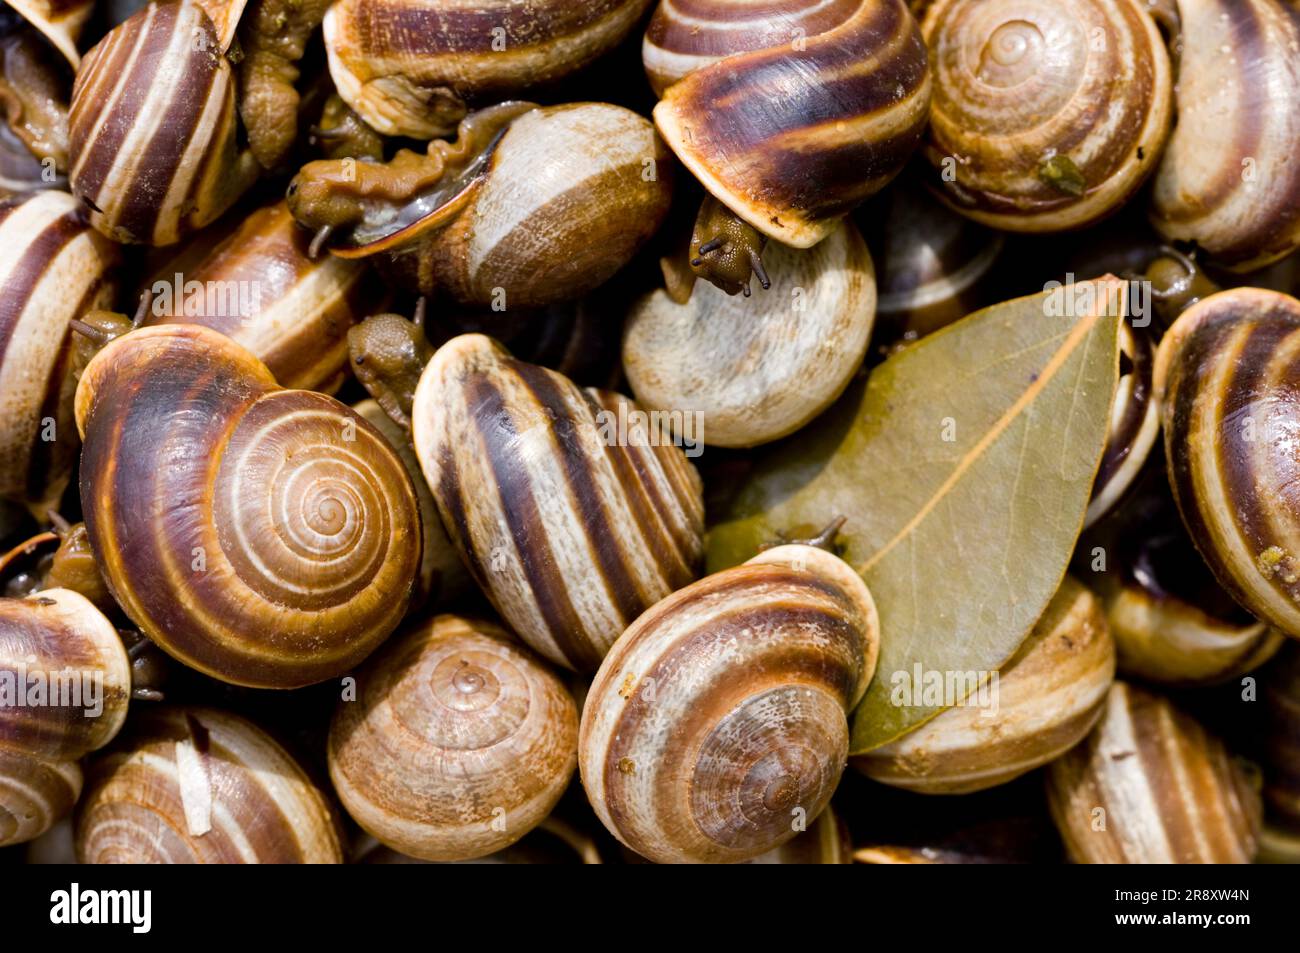 Portuguese Cooked Snails Stock Photo